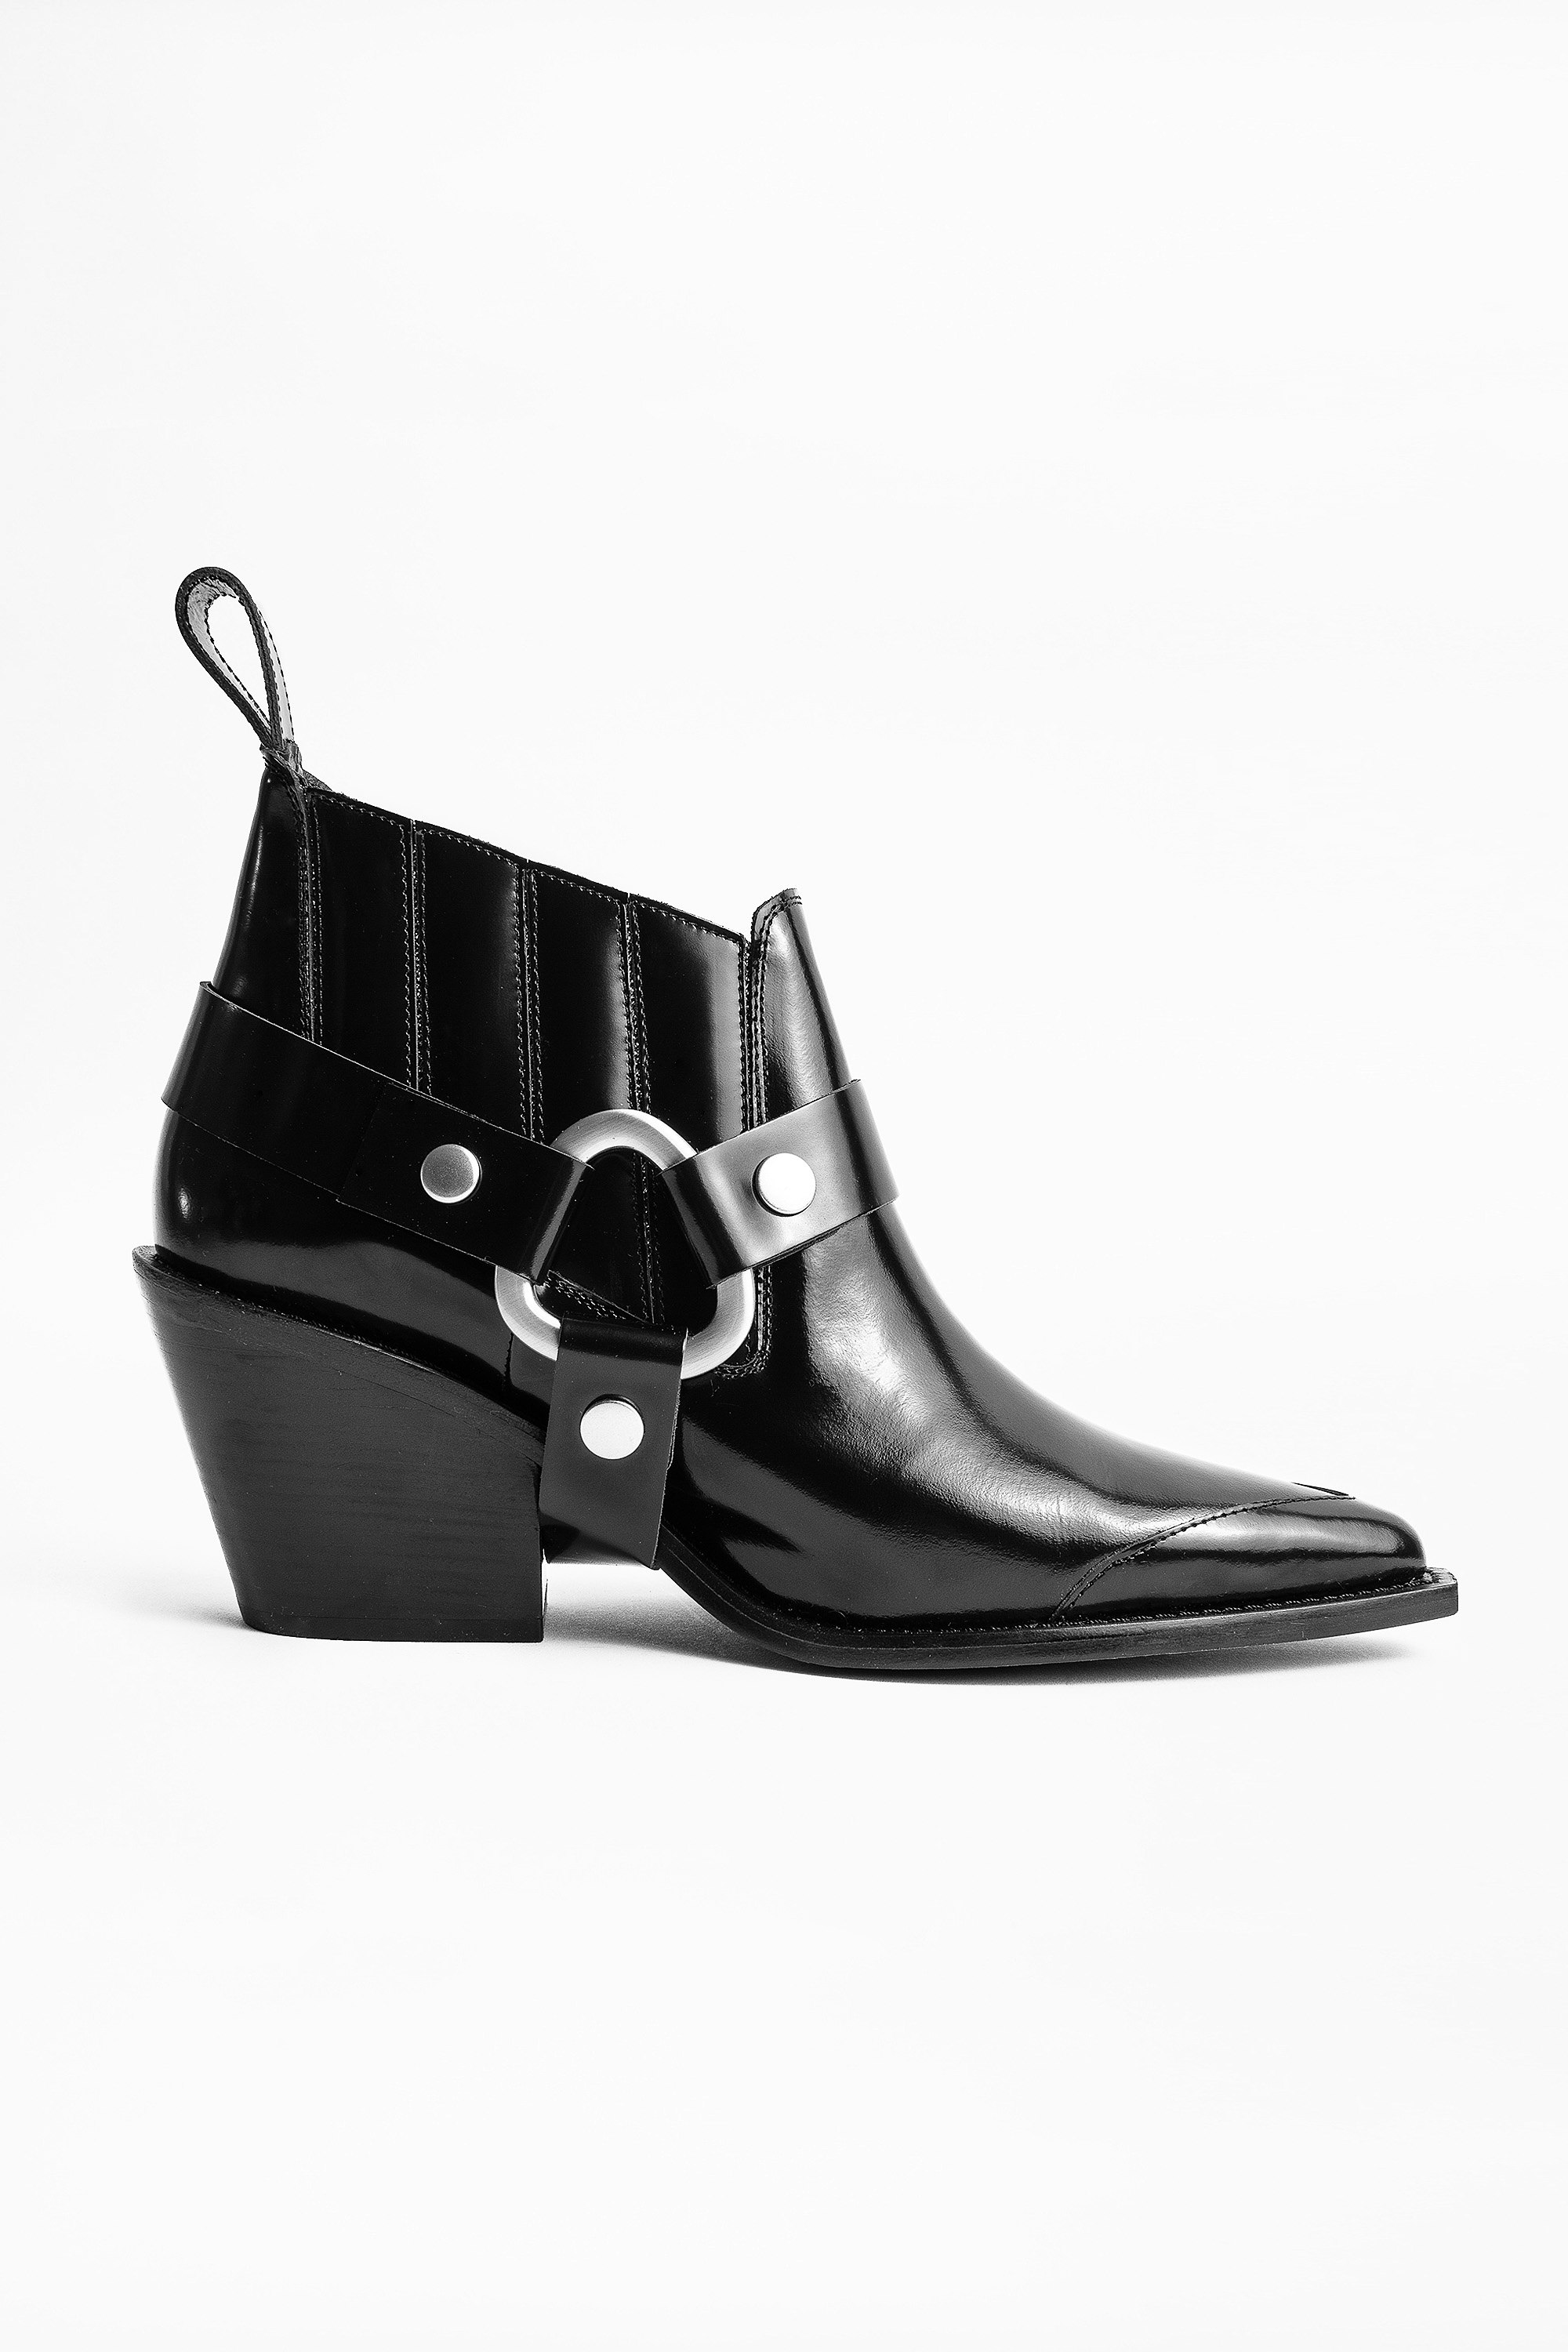 N'Dricks Glossy Ankle Boots Women’s black heeled ankle boots.